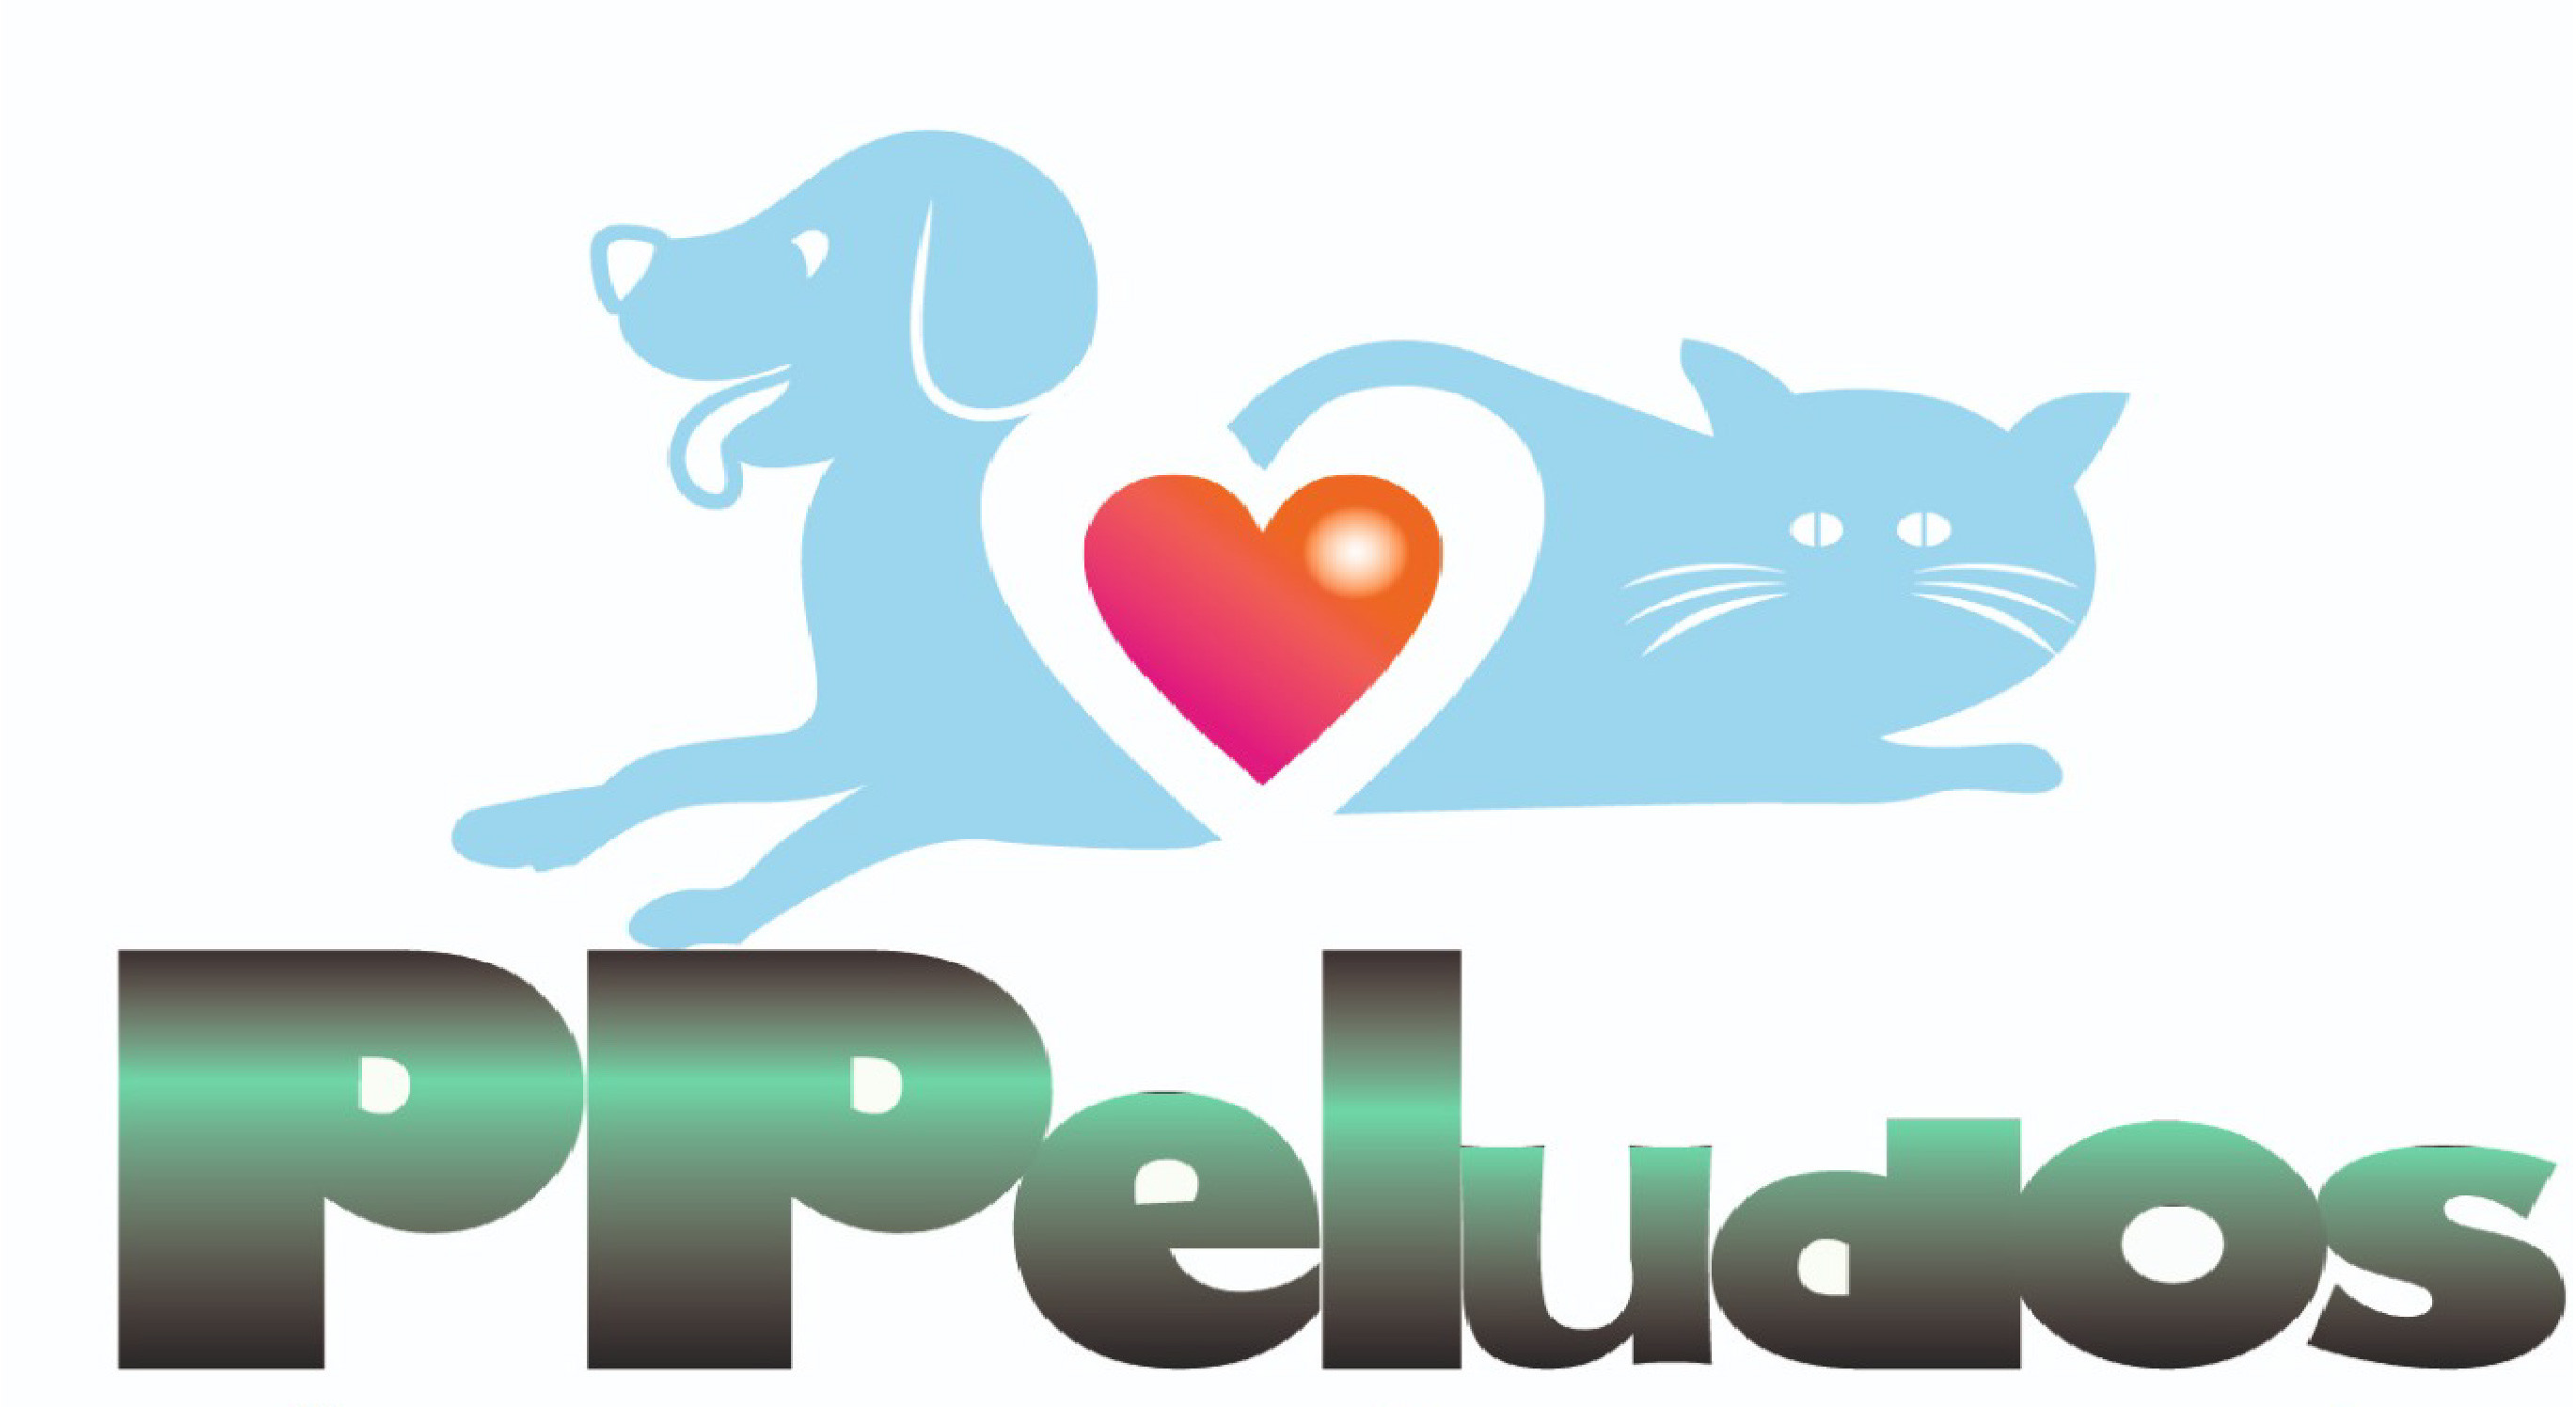 Ppeludos